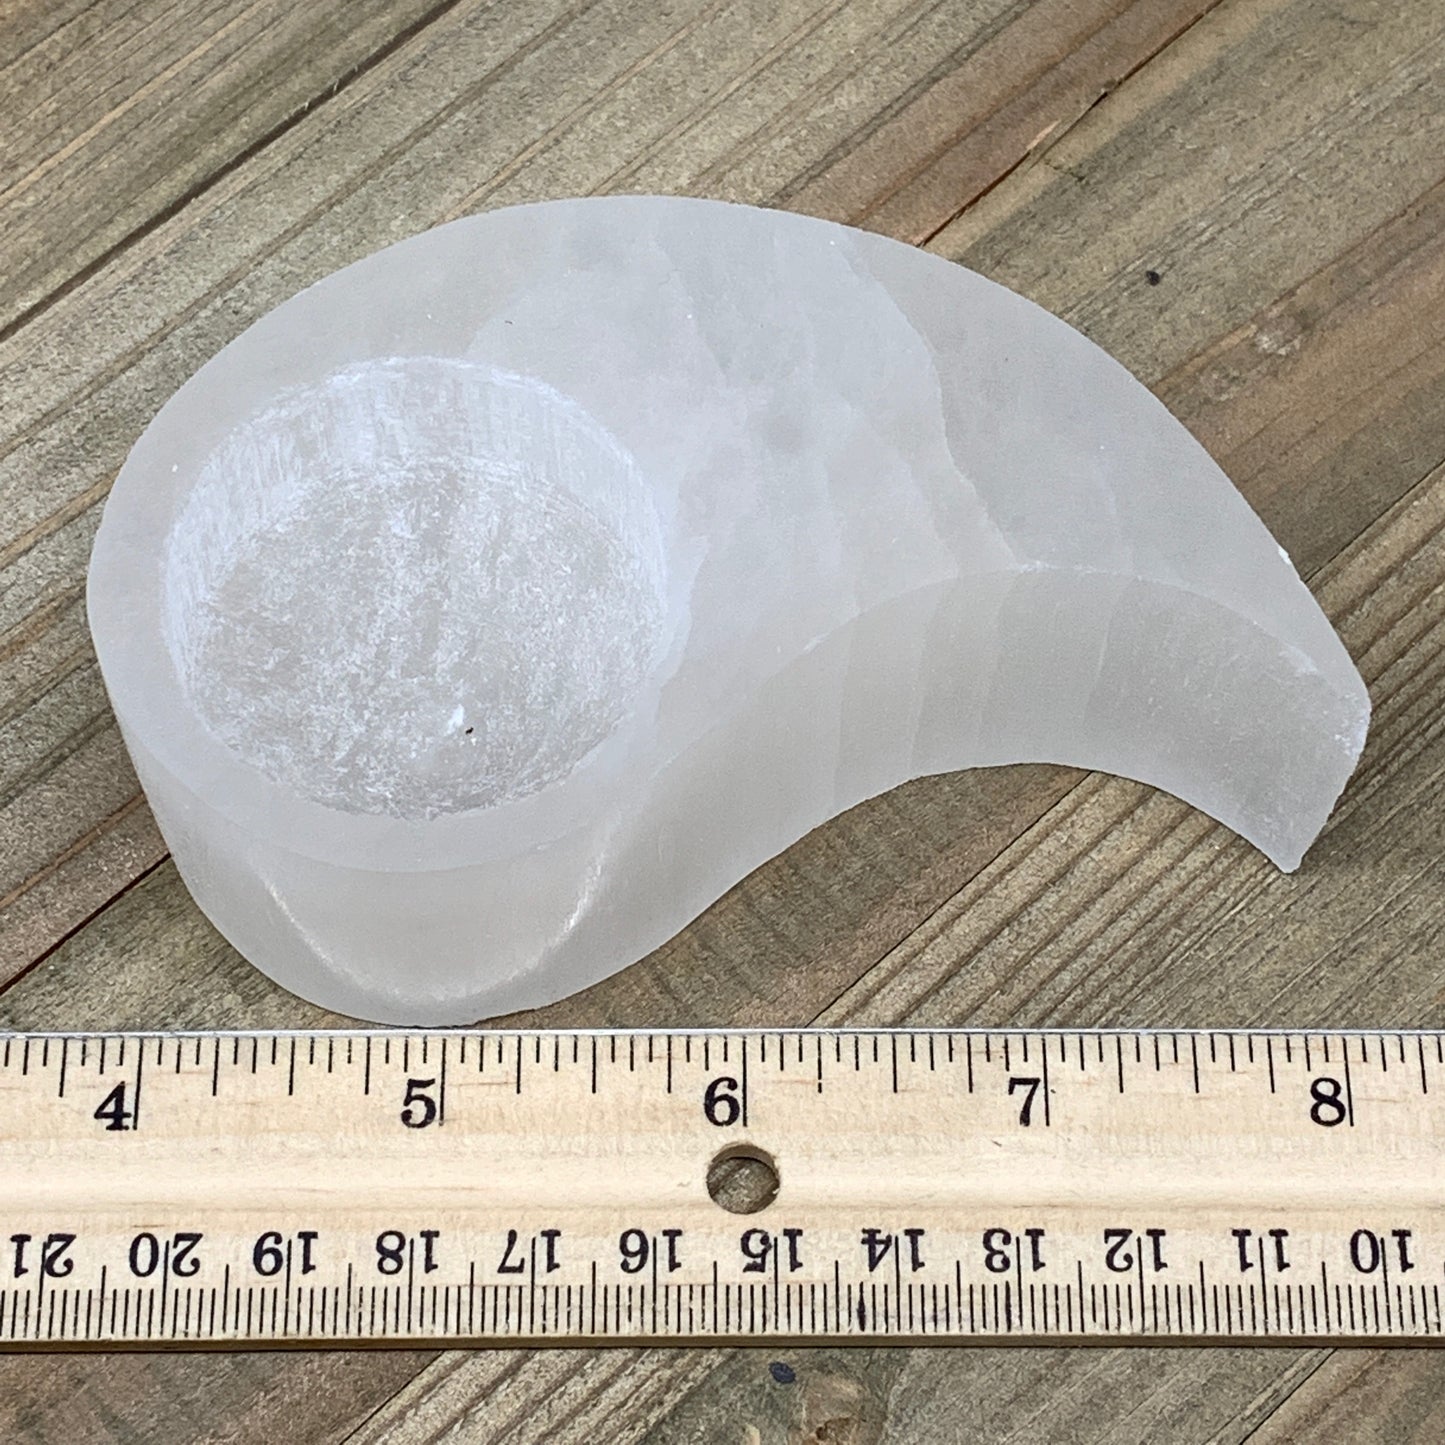 1pc, 240-280g, 4"x2.2"x1.6" White Selenite Candle Holder Wave Shape from Morocco